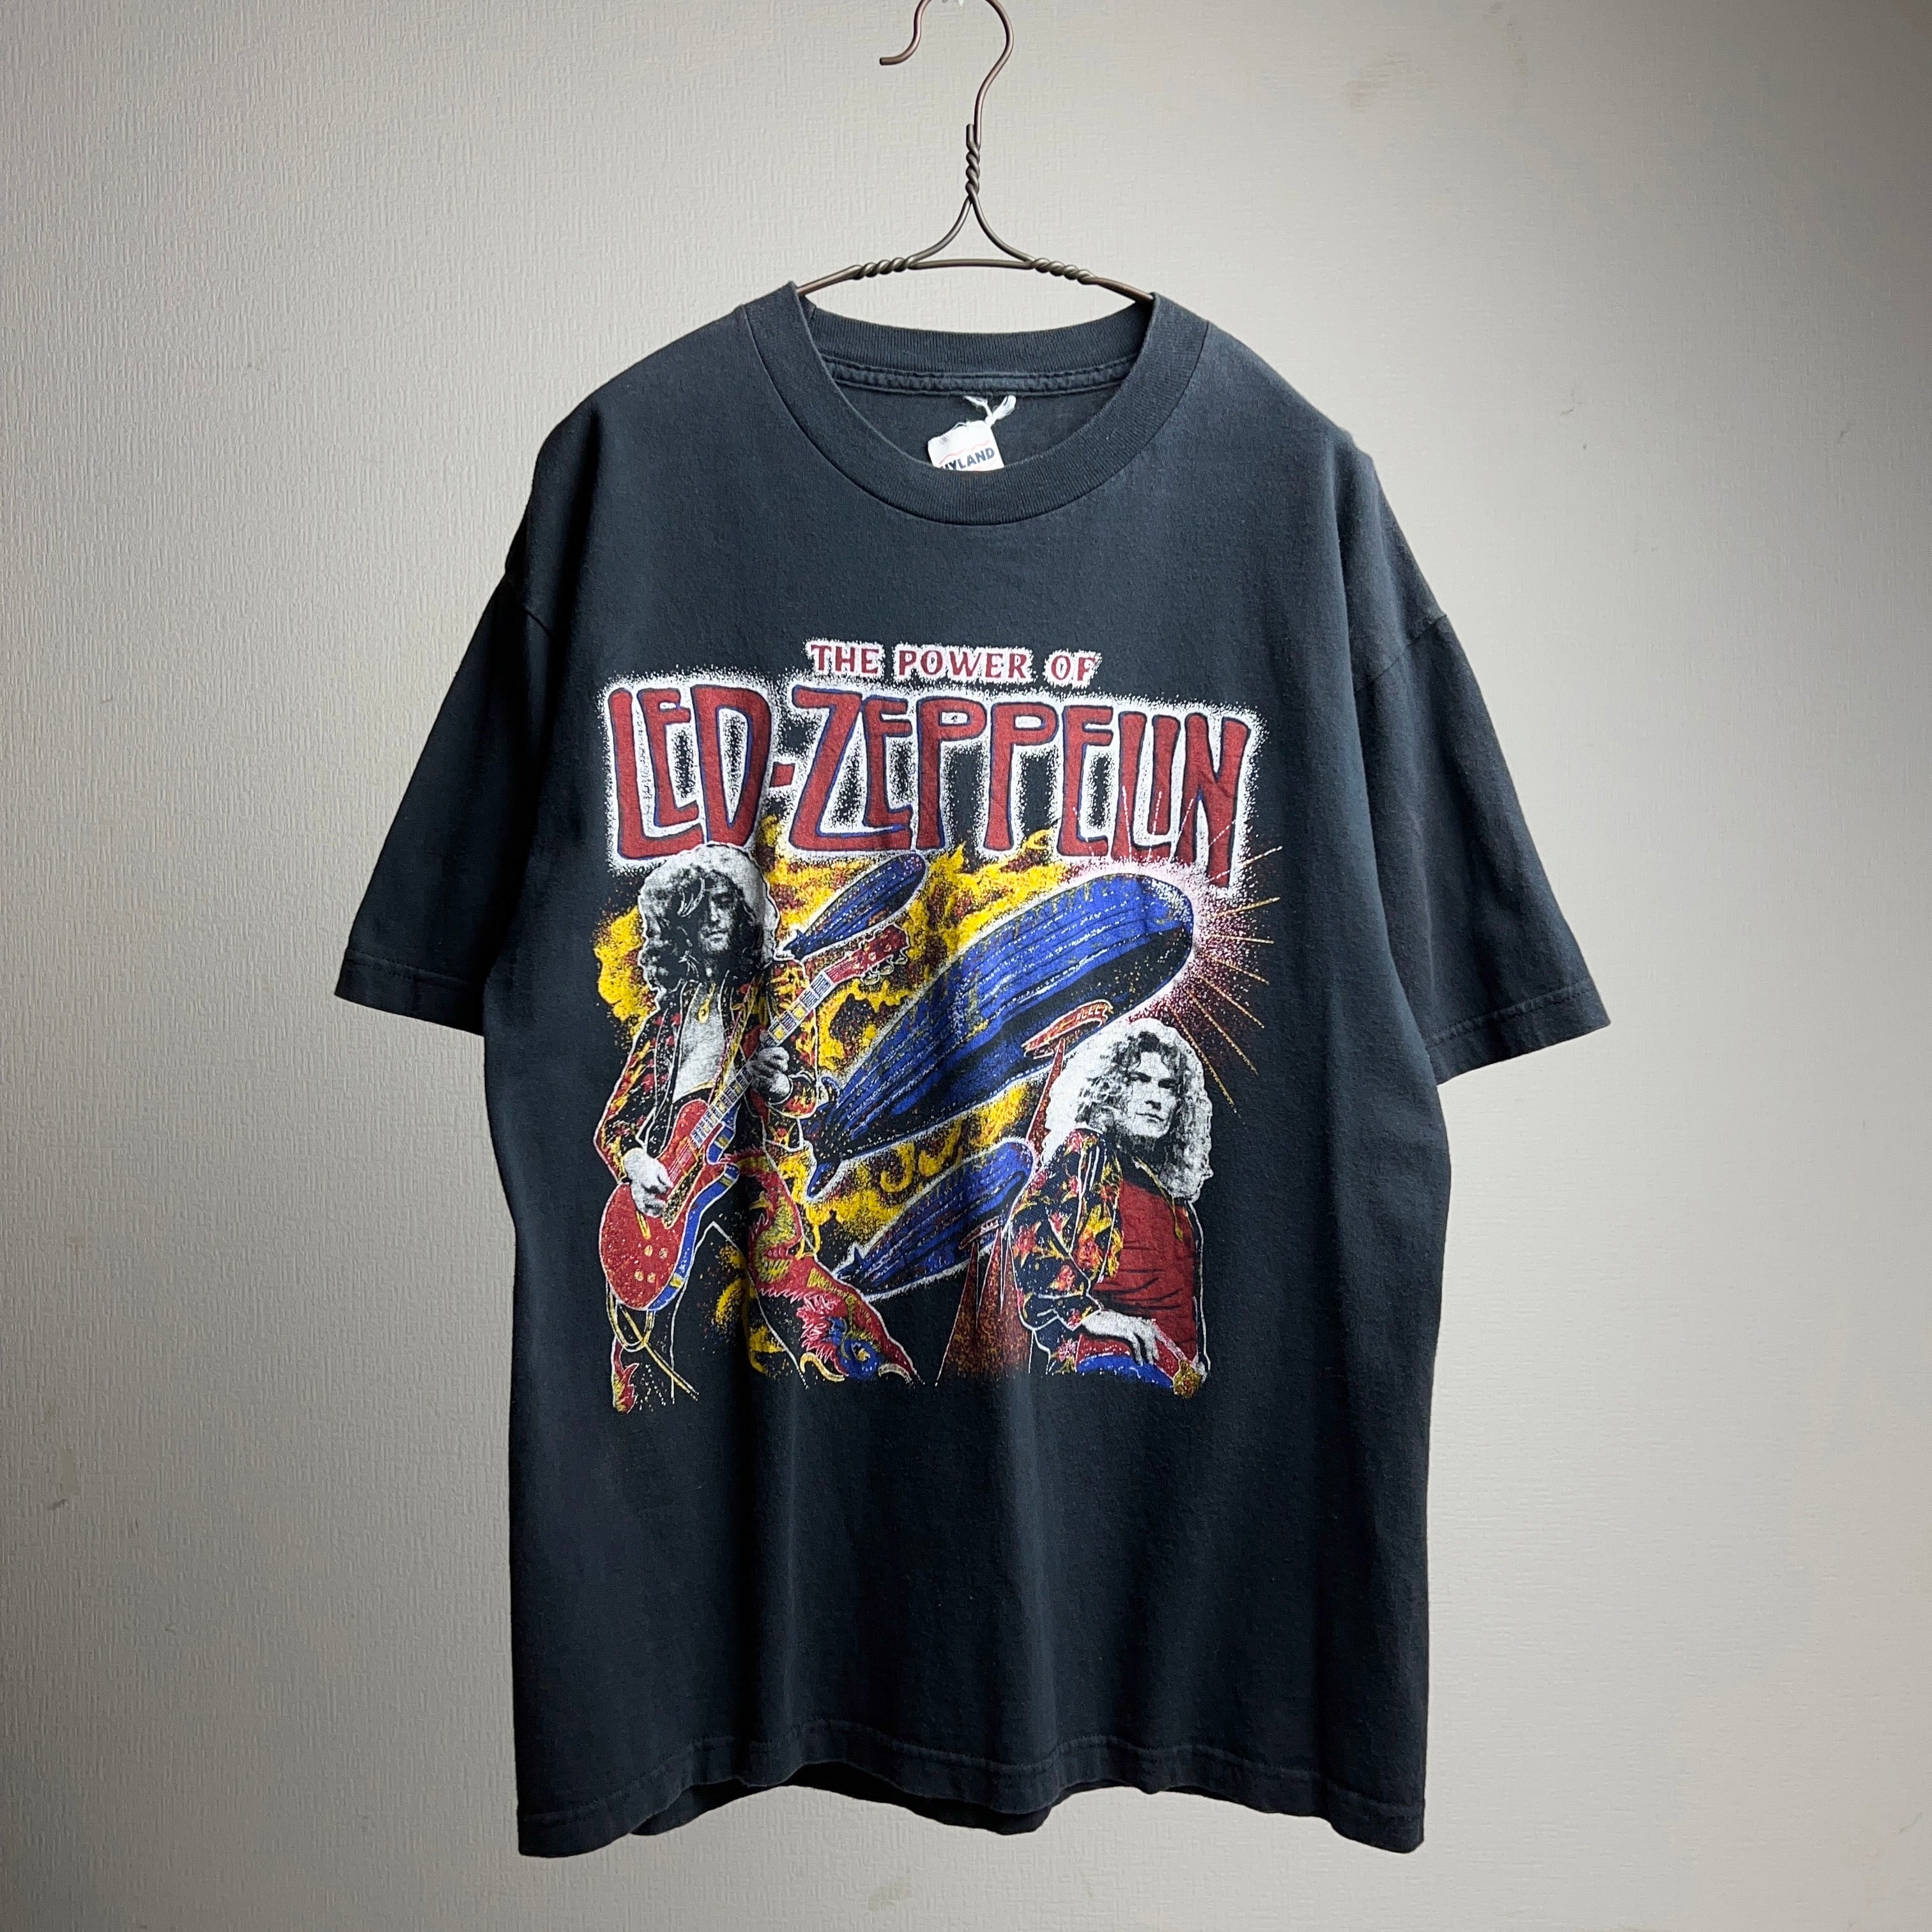 90's~00's LED ZEPPELIN Band Tshirt SIZE LARGE【0606A08】【送料無料】